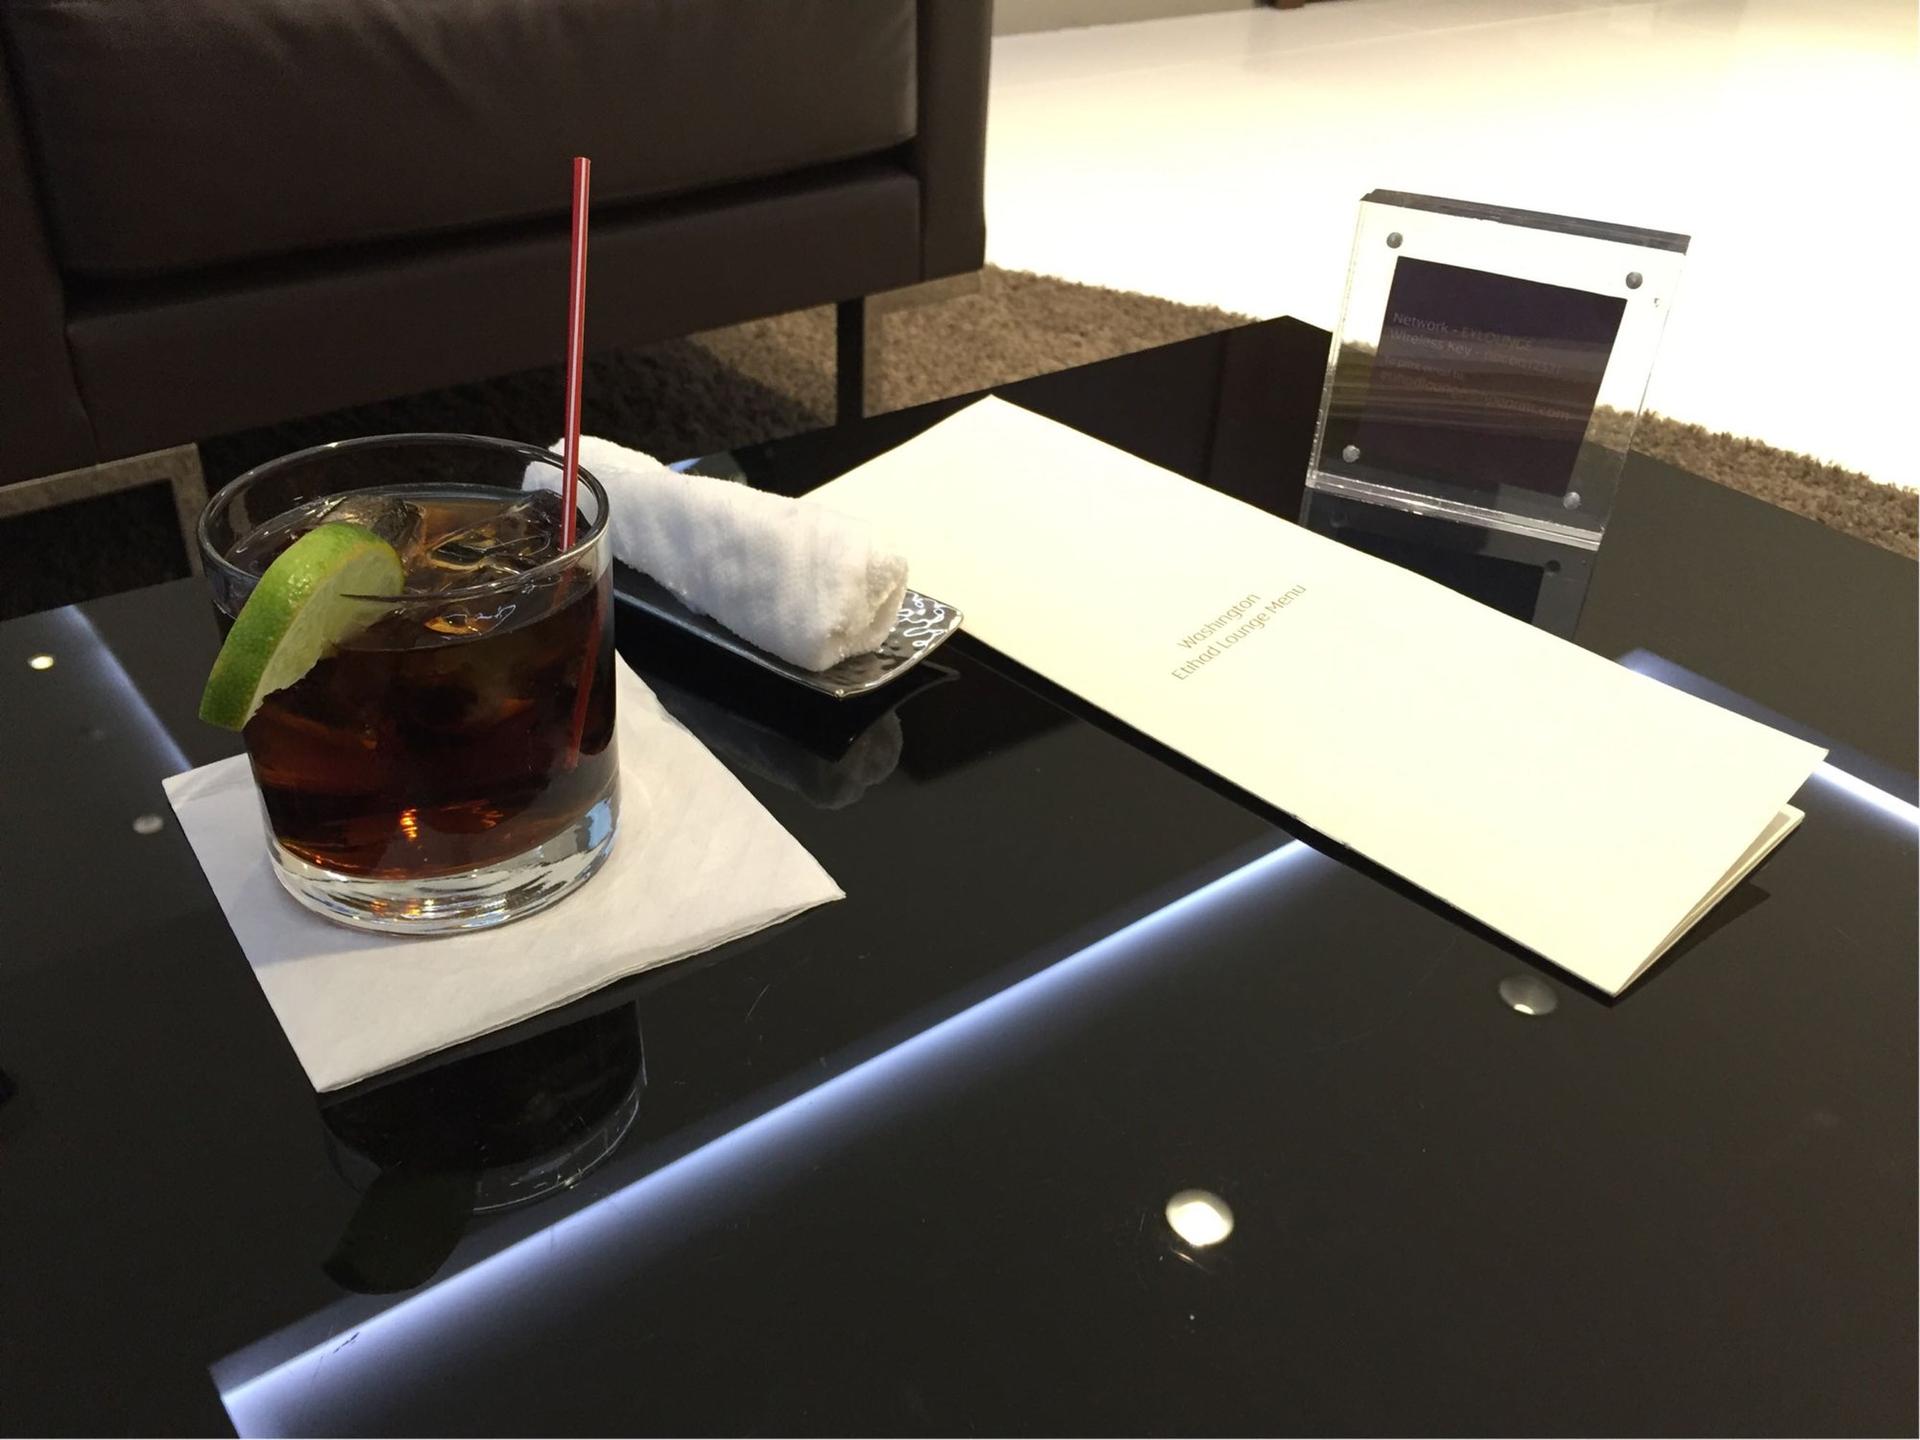 Etihad Airways First & Business Class Lounge image 16 of 17